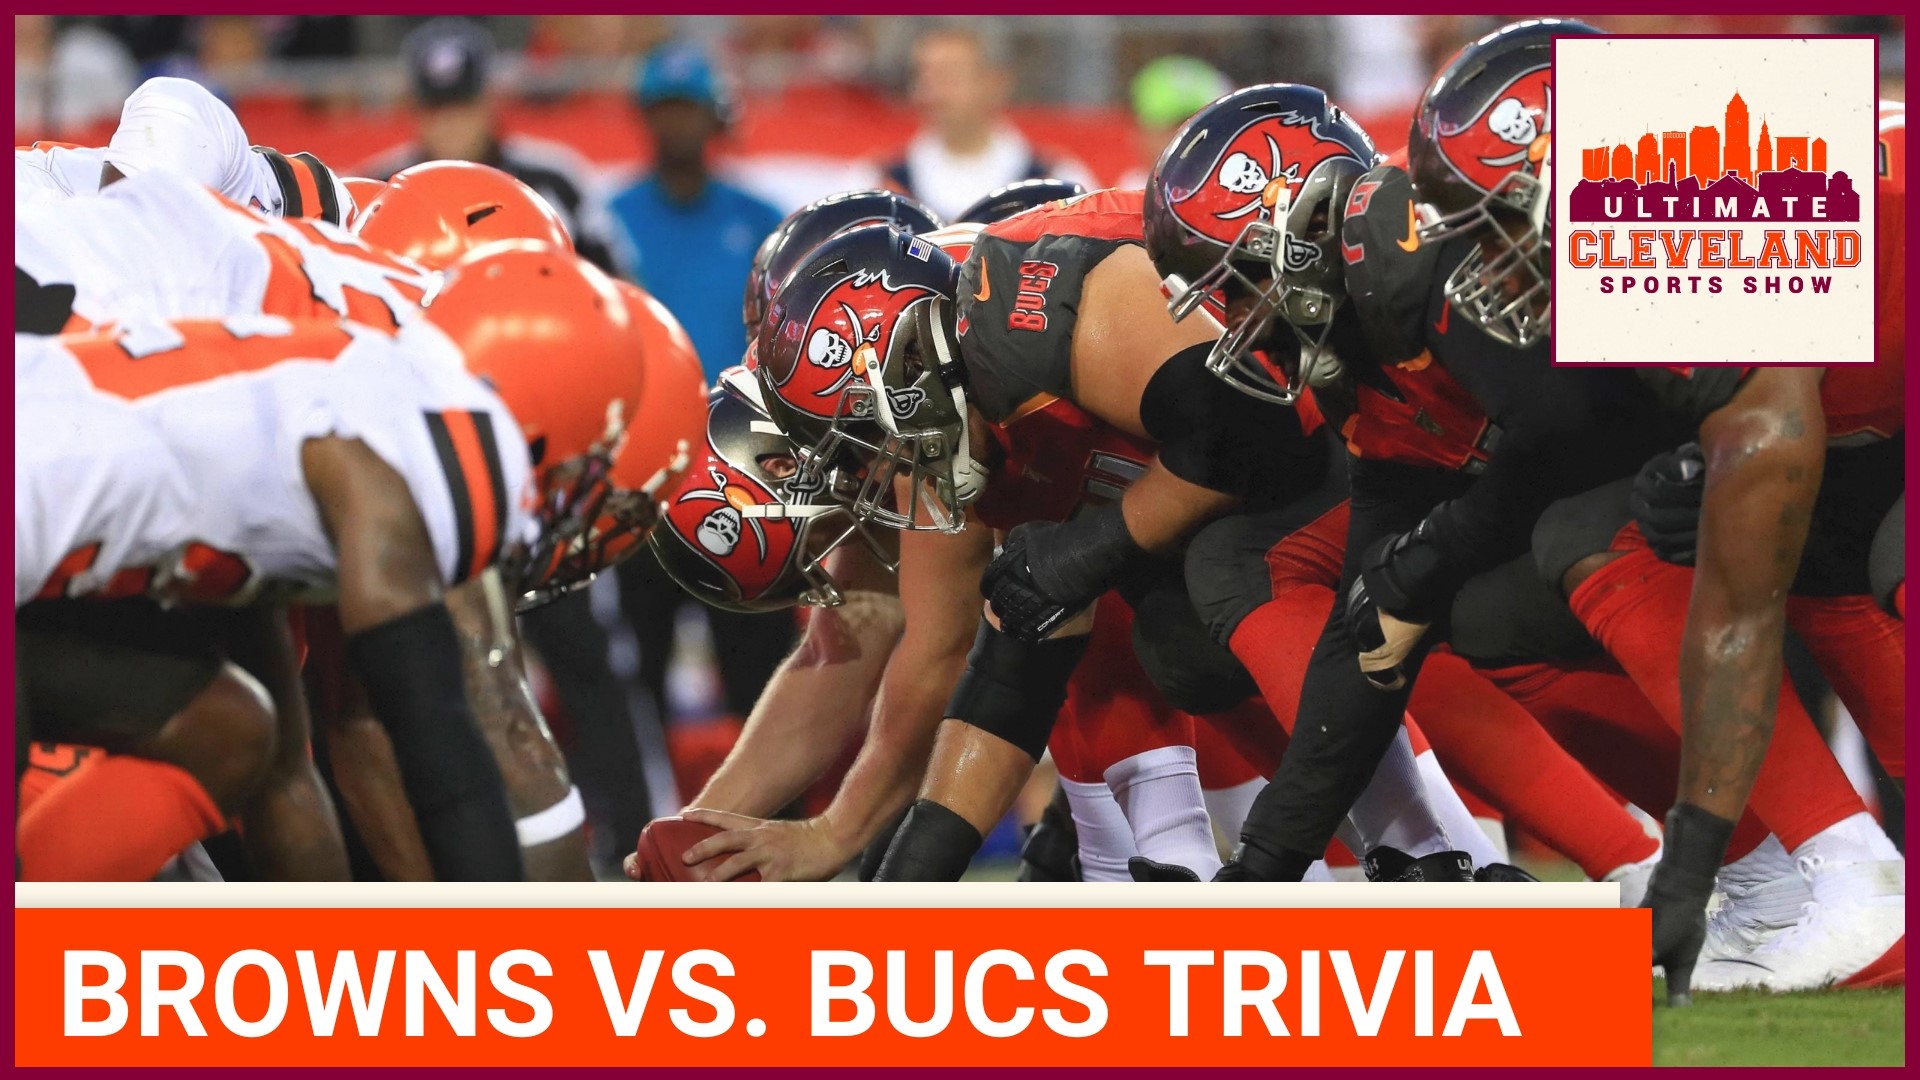 Ahead of Browns vs. Bucs we go back in time to find some monumental moments in this short series rivalry.